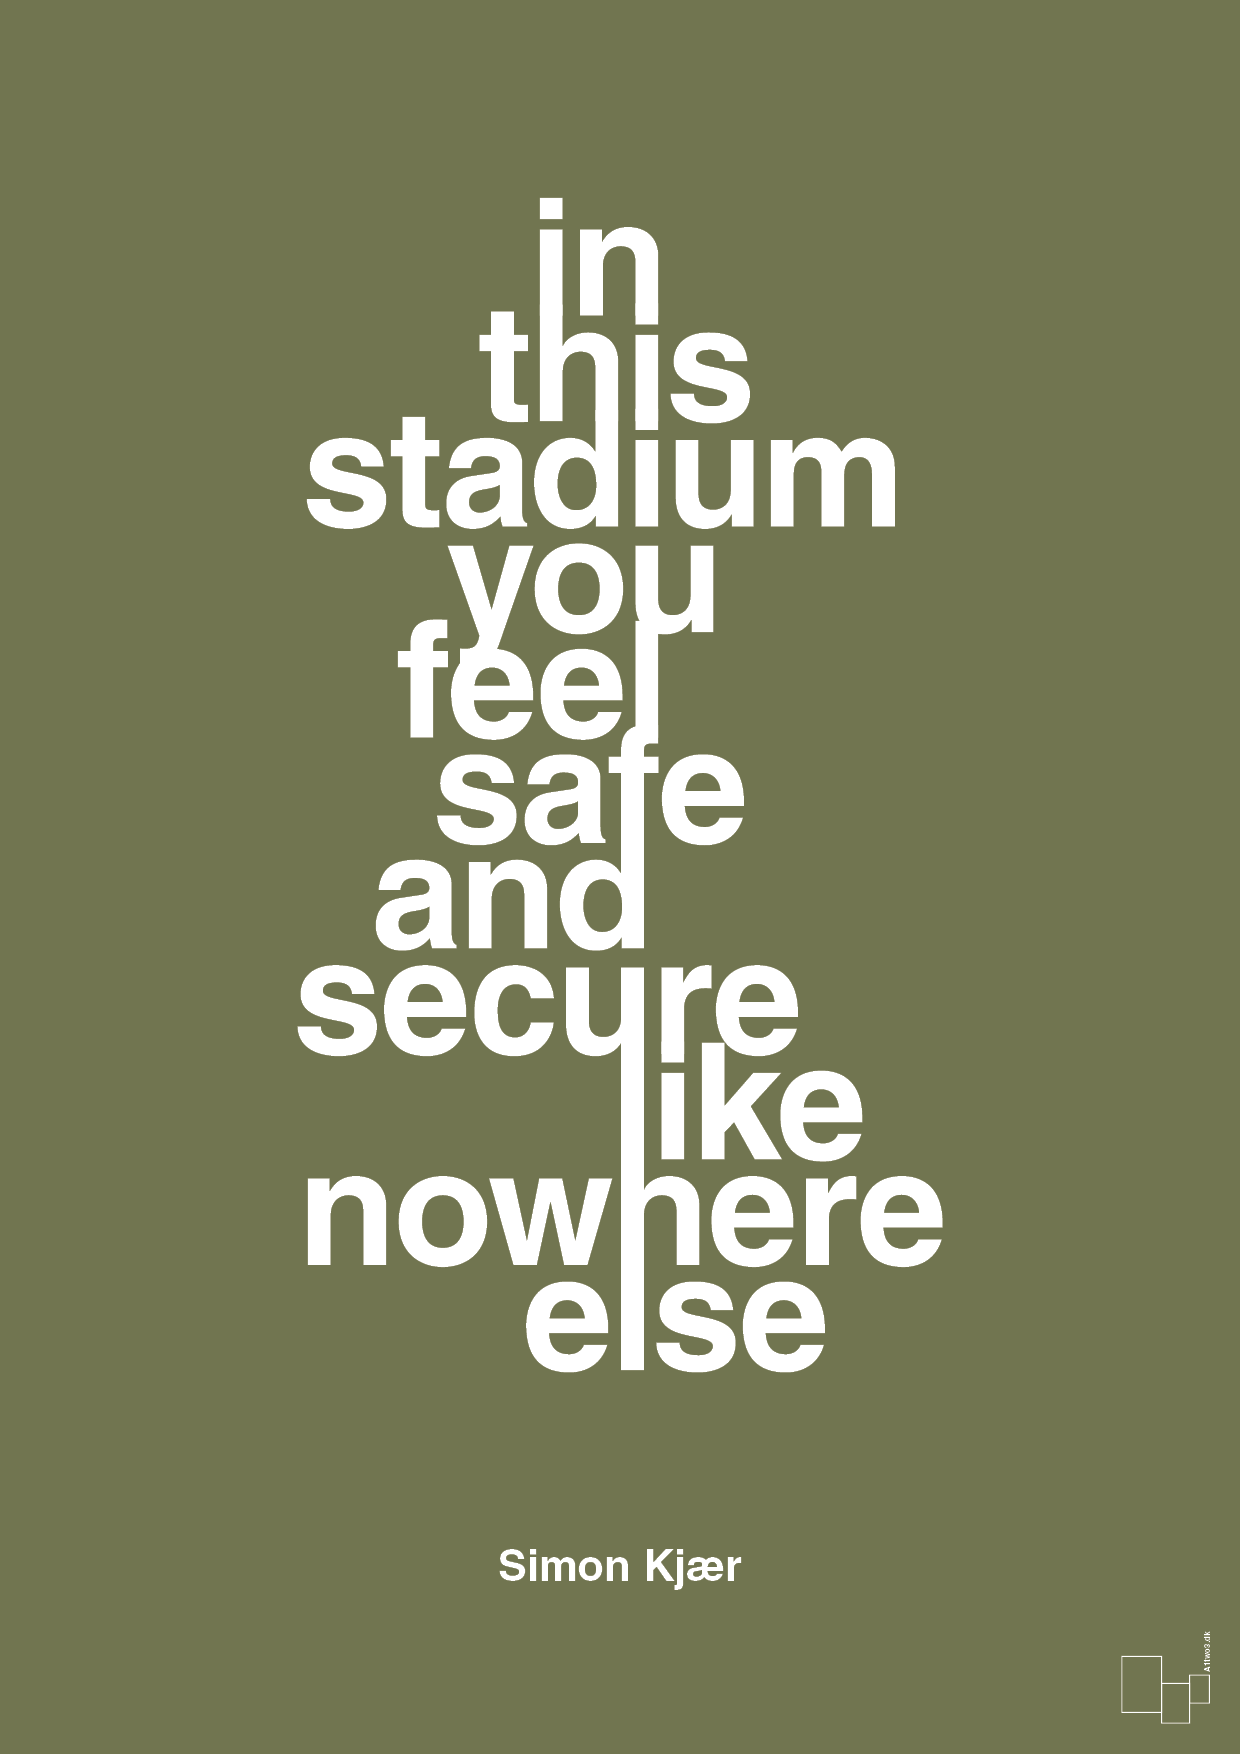 in this stadium you feel safe and secure like nowhere else - Plakat med Citater i Secret Meadow